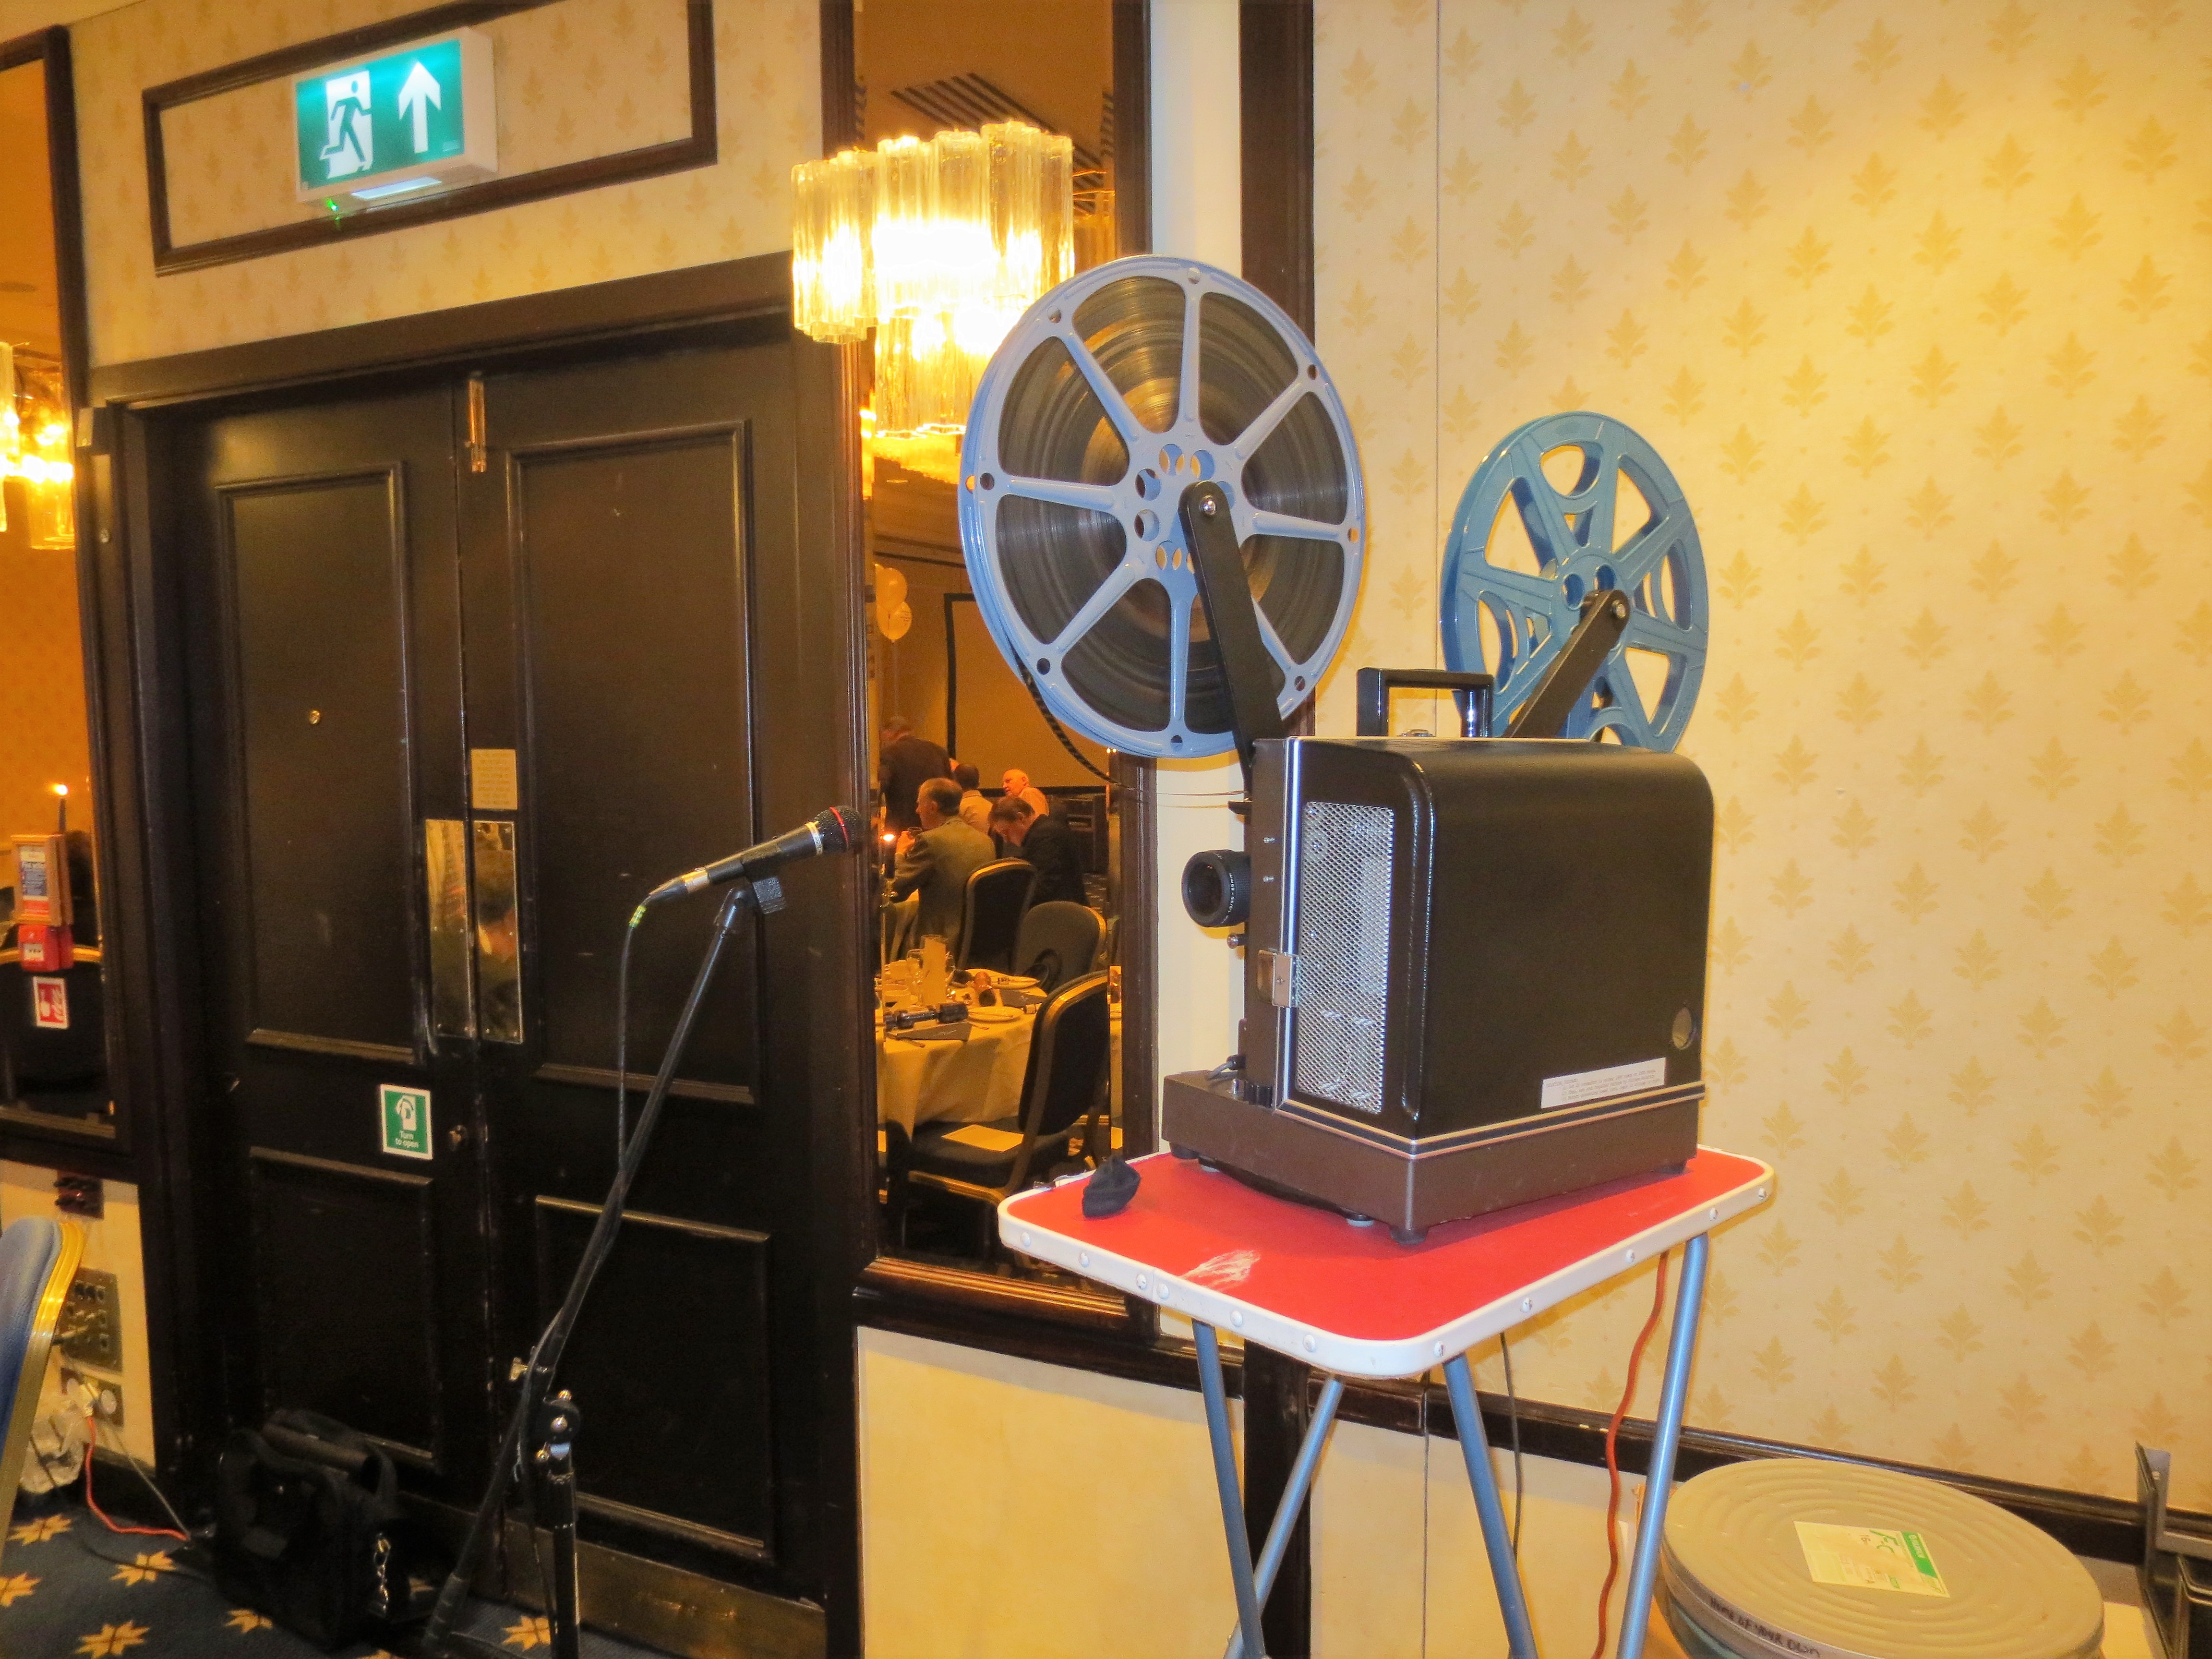 16mm projector ready for the evening's film show